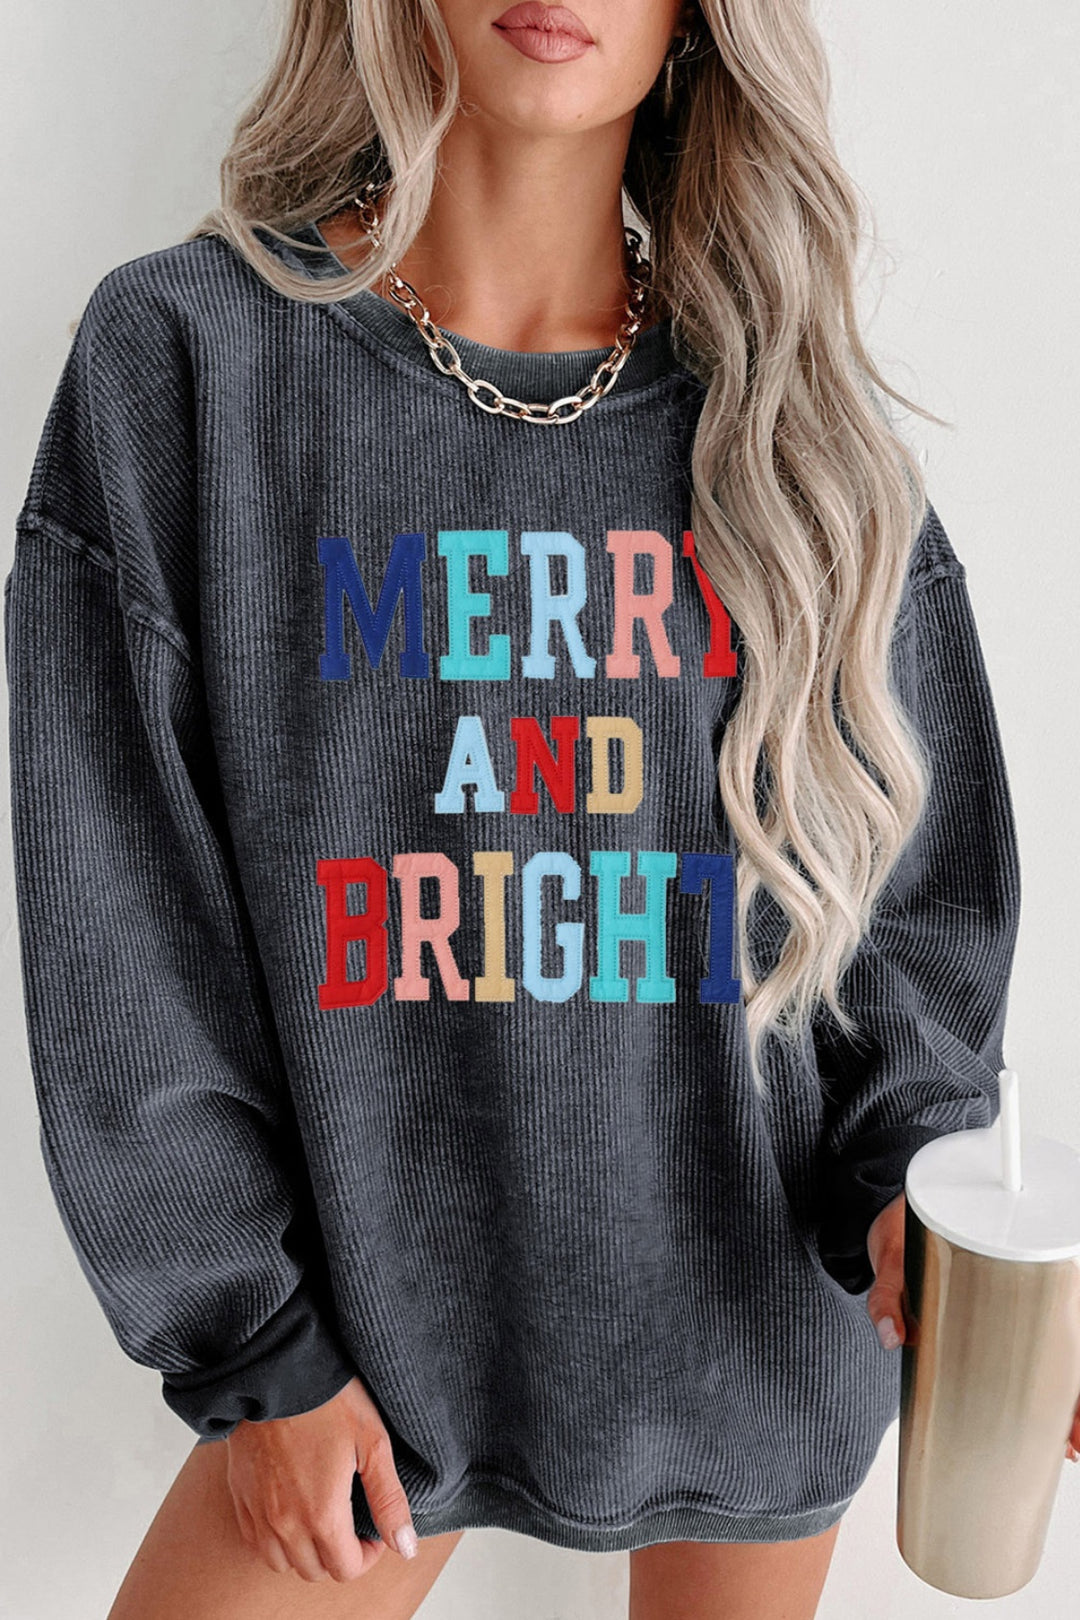 Merry and Bright Graphic Sweatshirt - Cheeky Chic Boutique